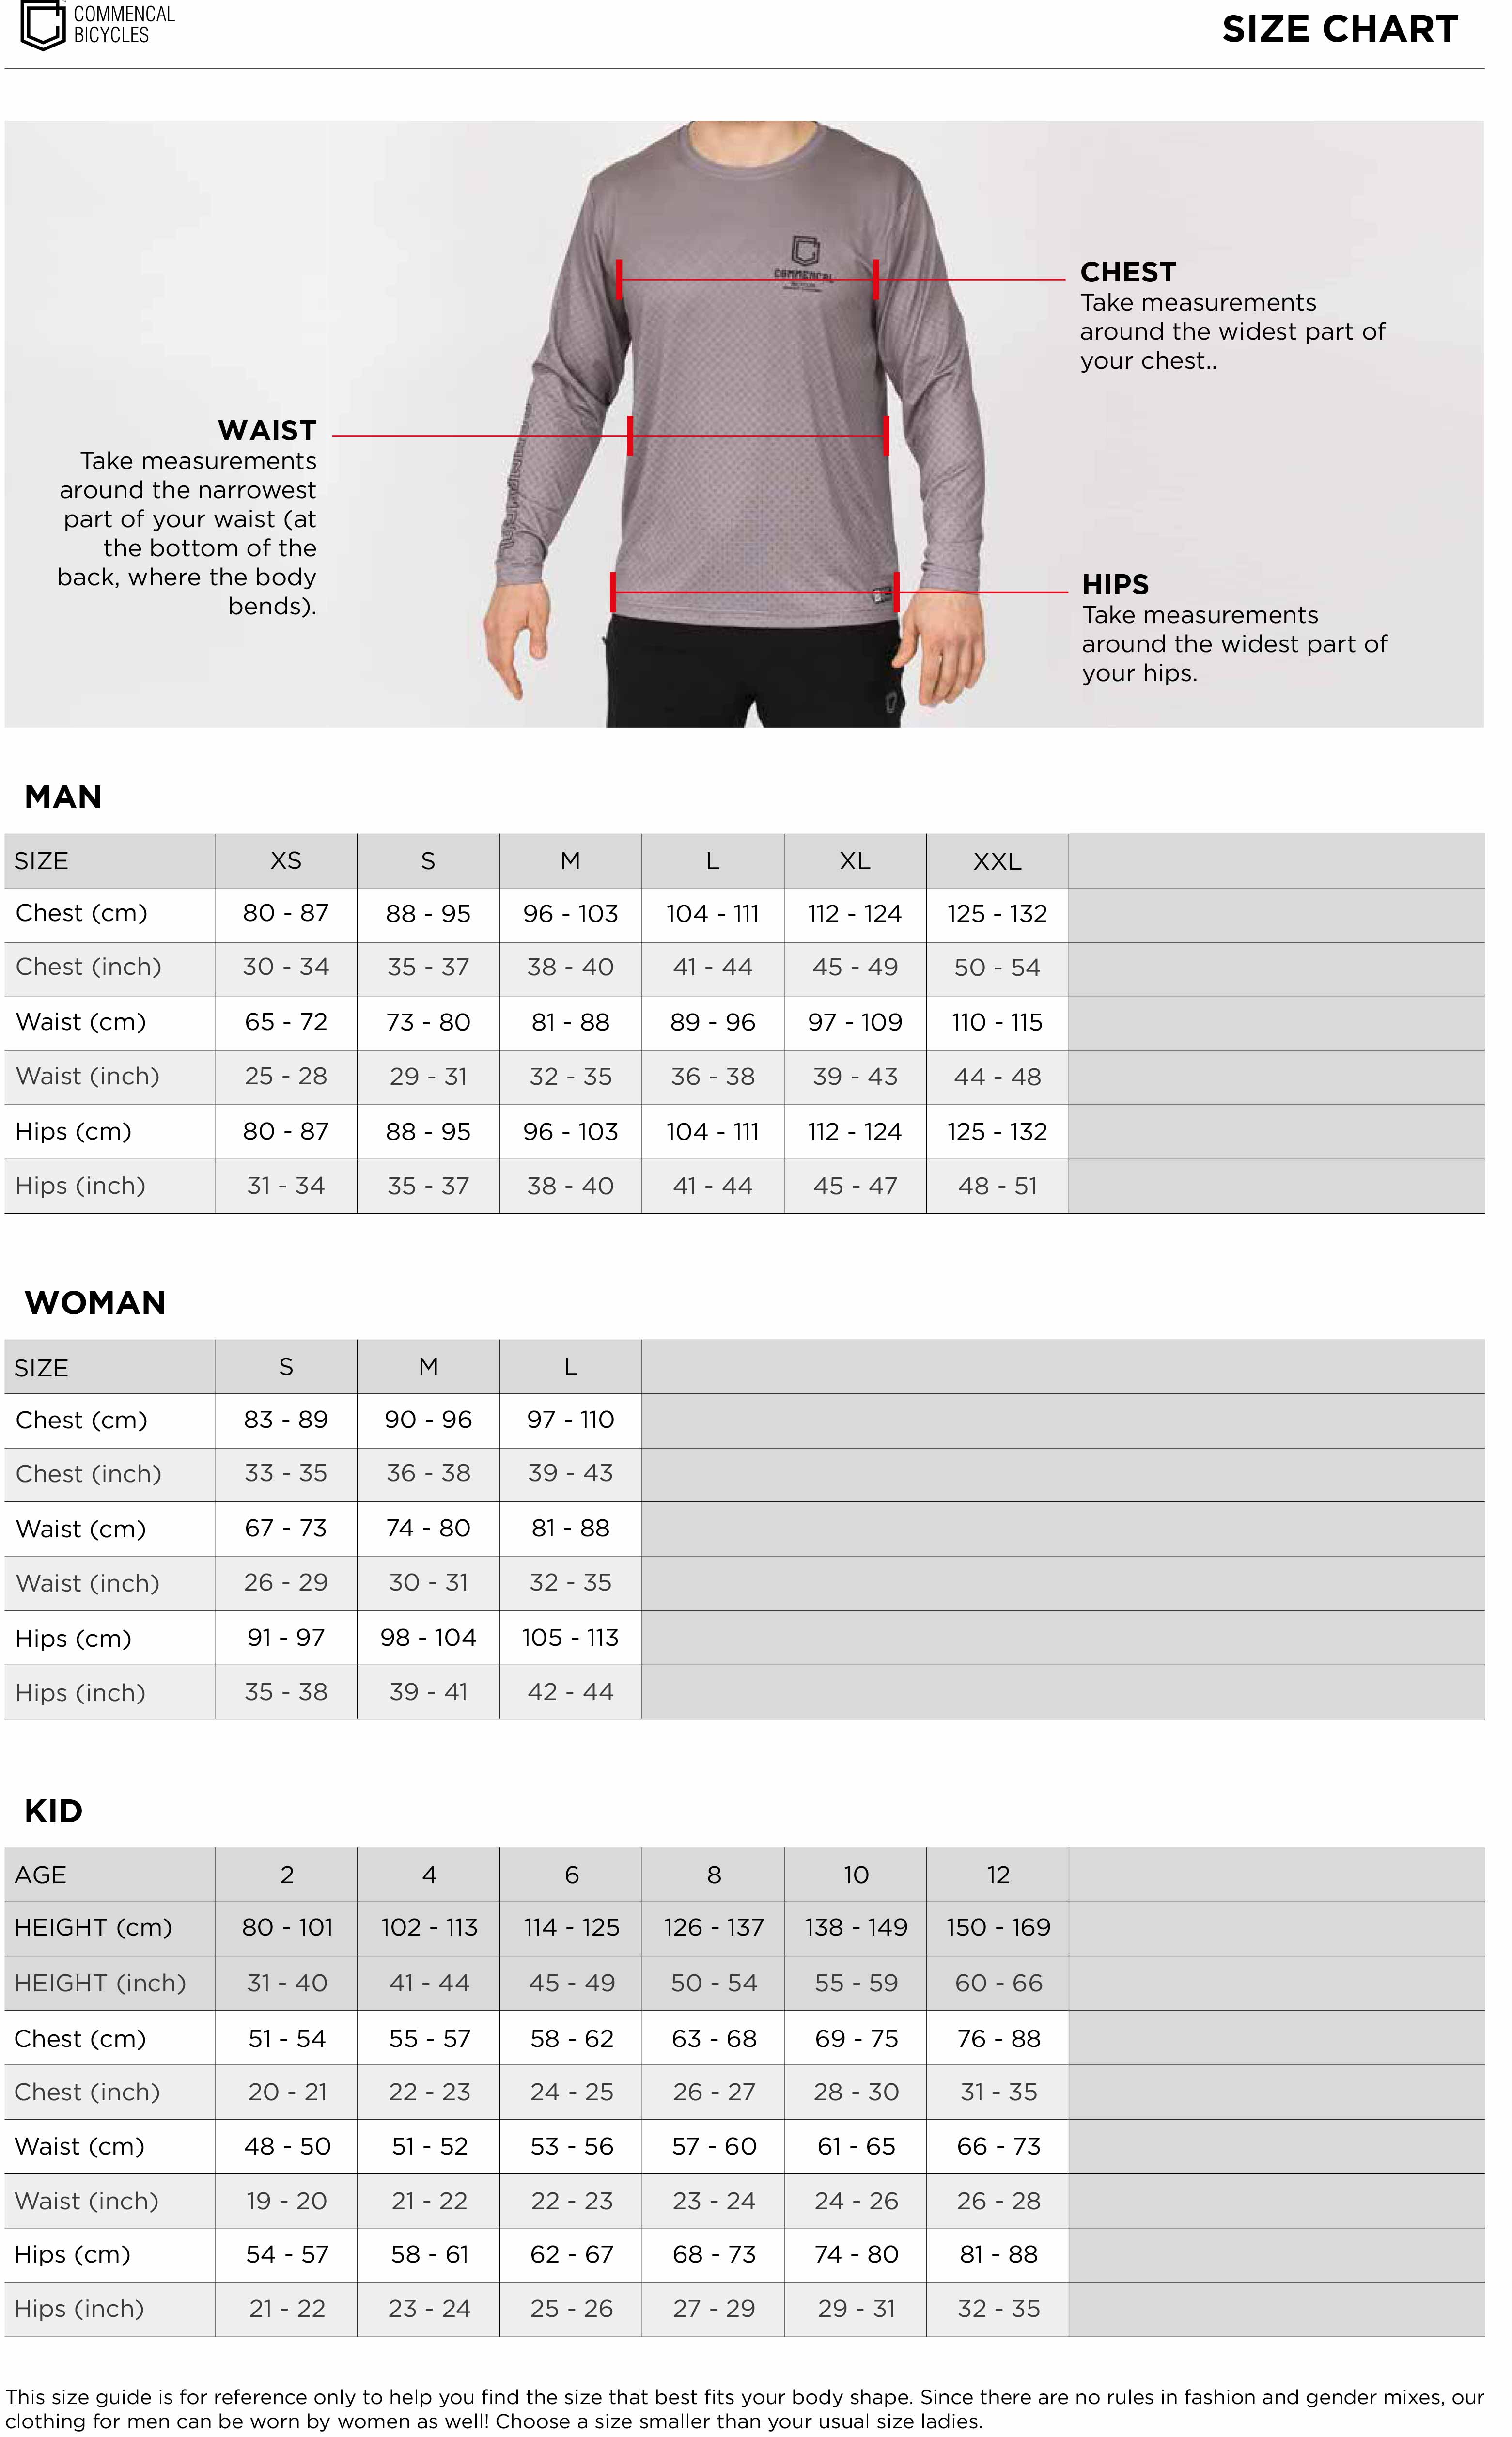 COMMENCAL CORPORATE LONG SLEEVE JERSEY RED DIRT